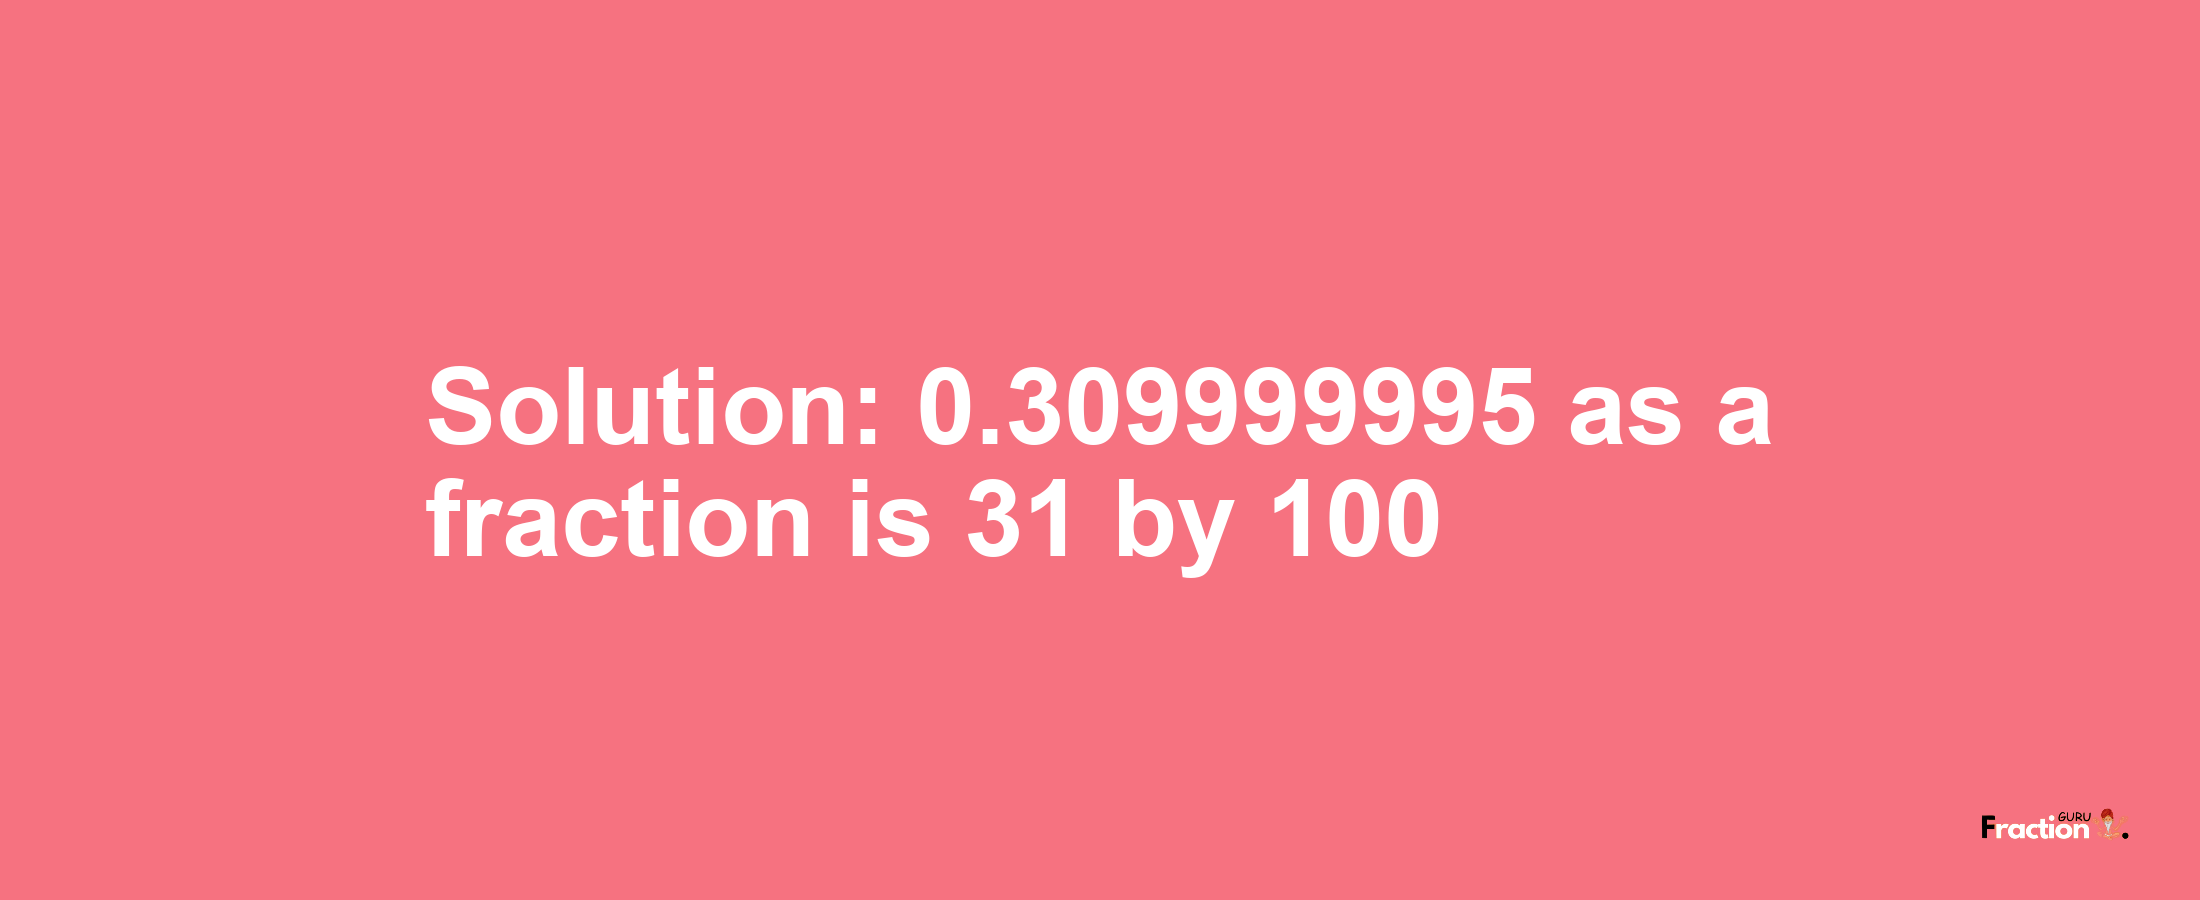 Solution:0.309999995 as a fraction is 31/100